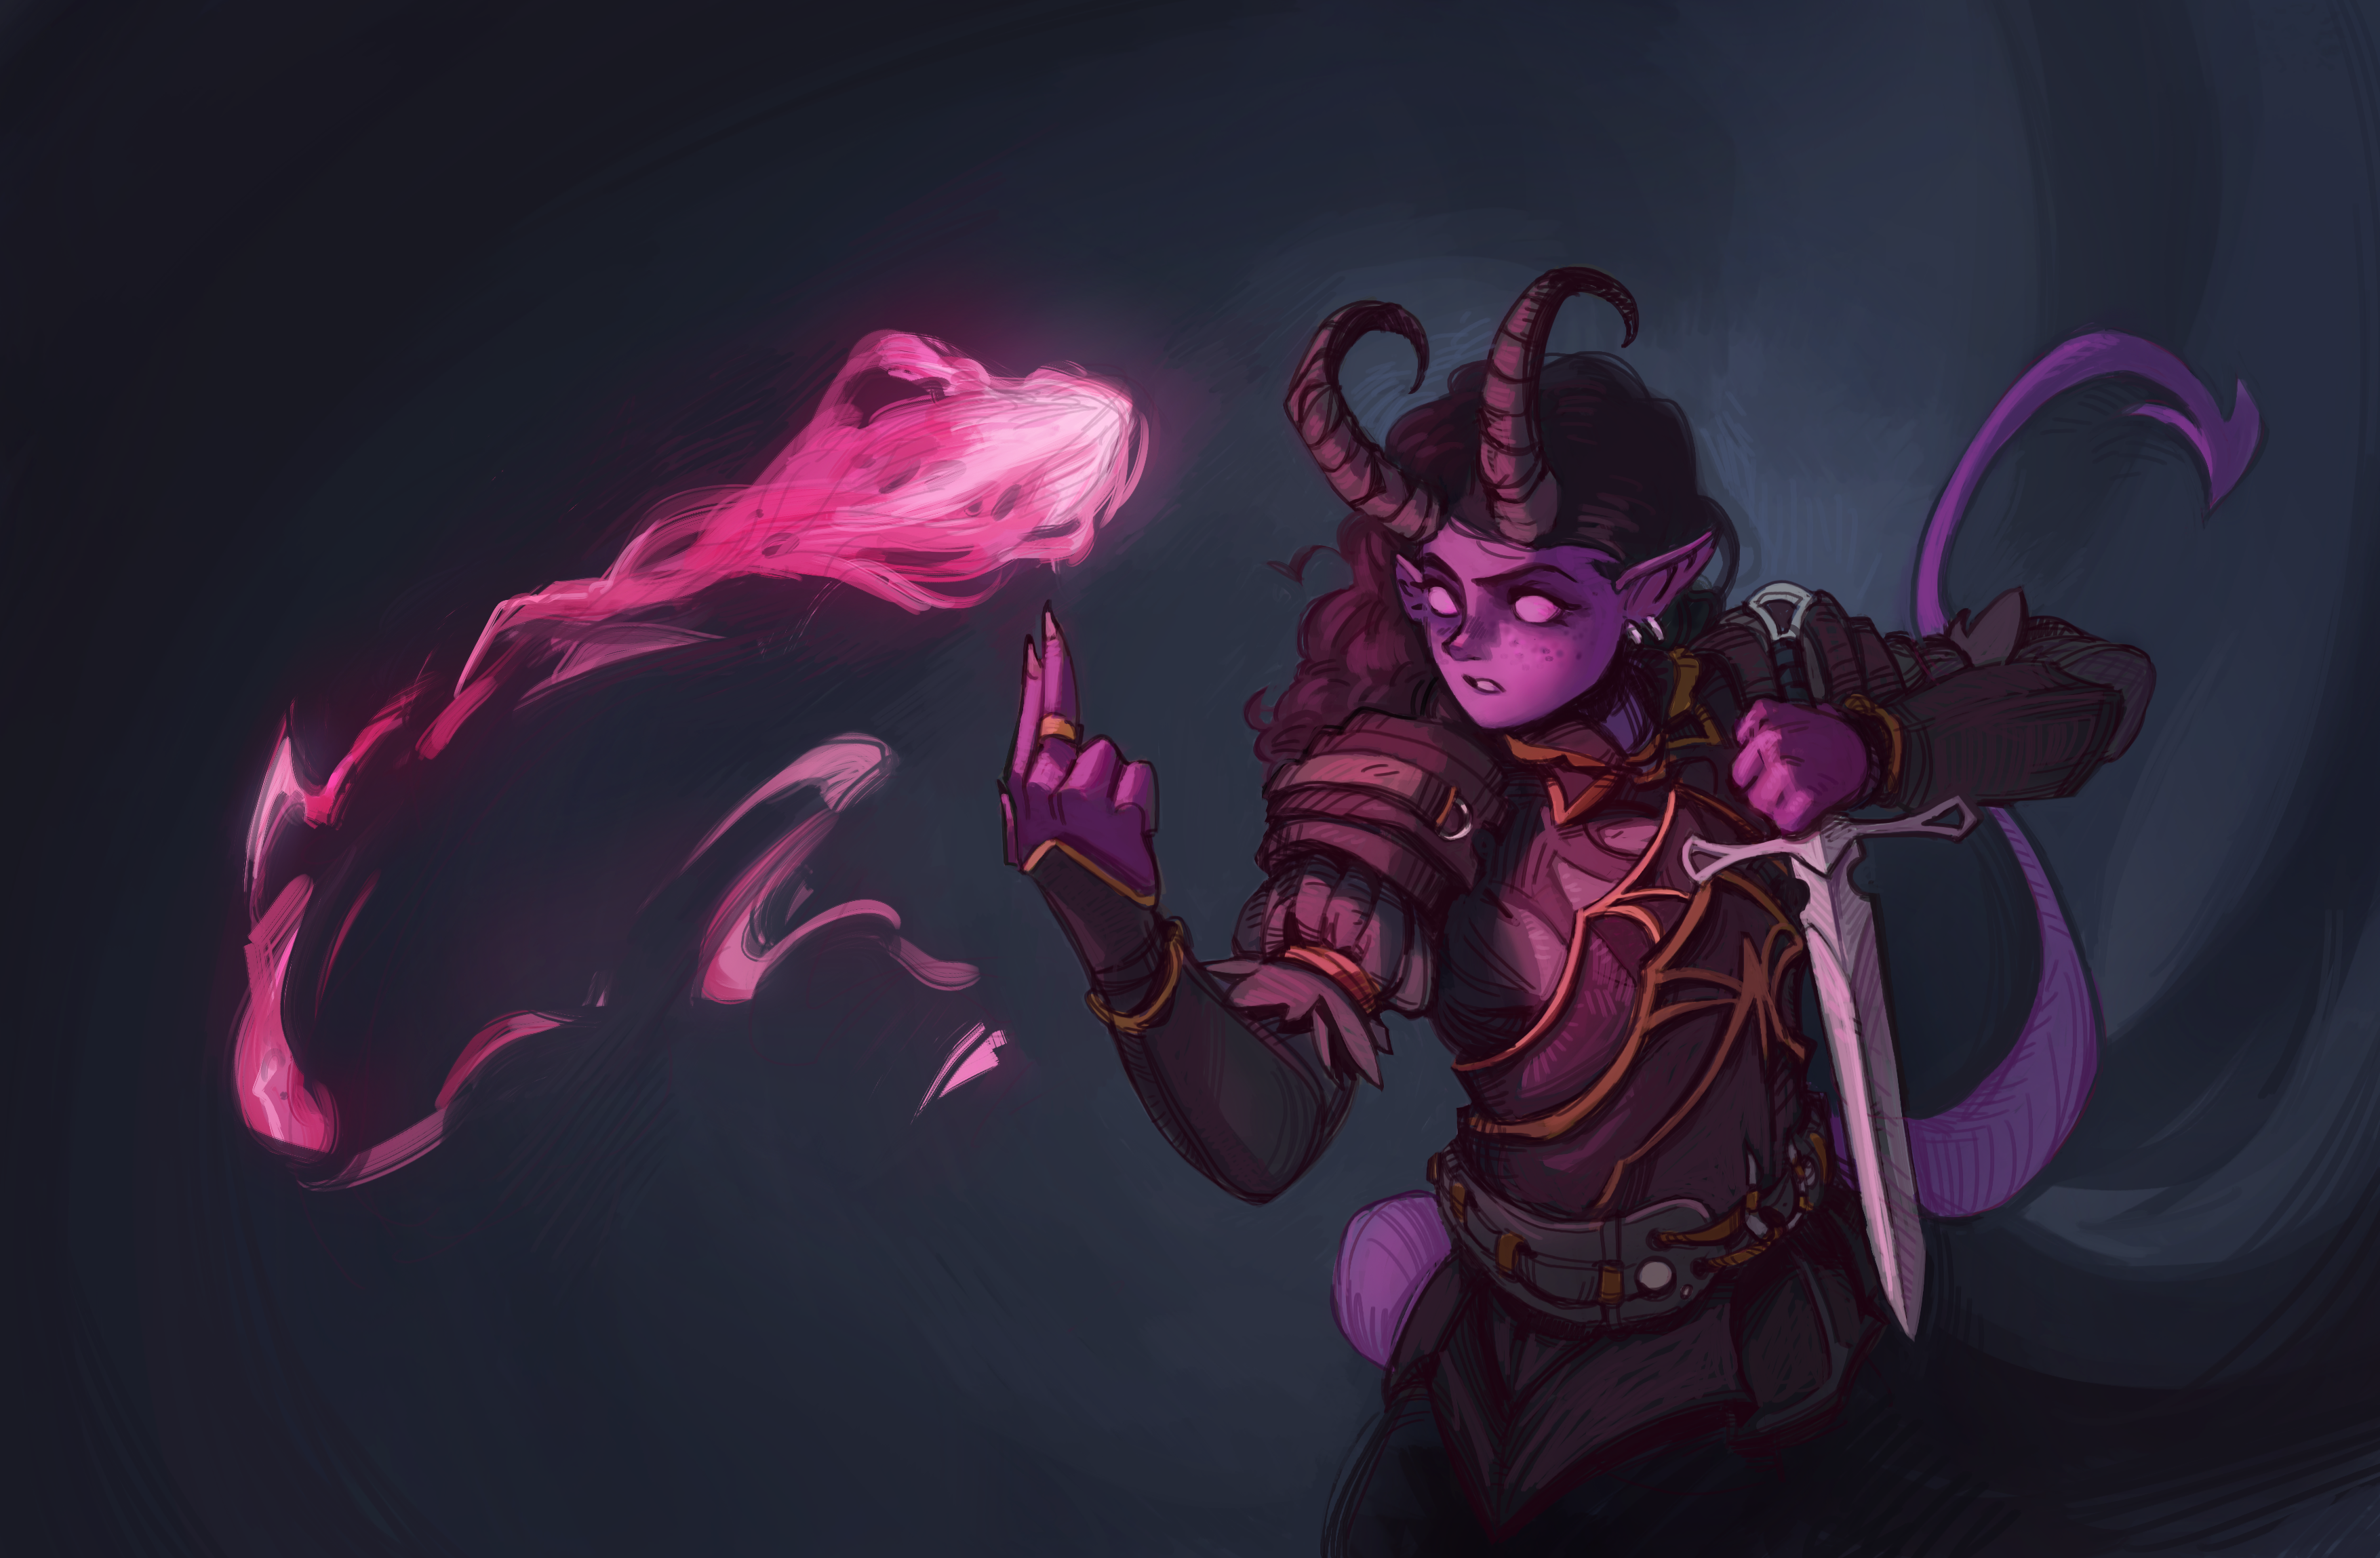 Art Commission Of My Tiefling Warlock, Anihiri! I Absolutely Love Her. Drawn By U ArkRooT